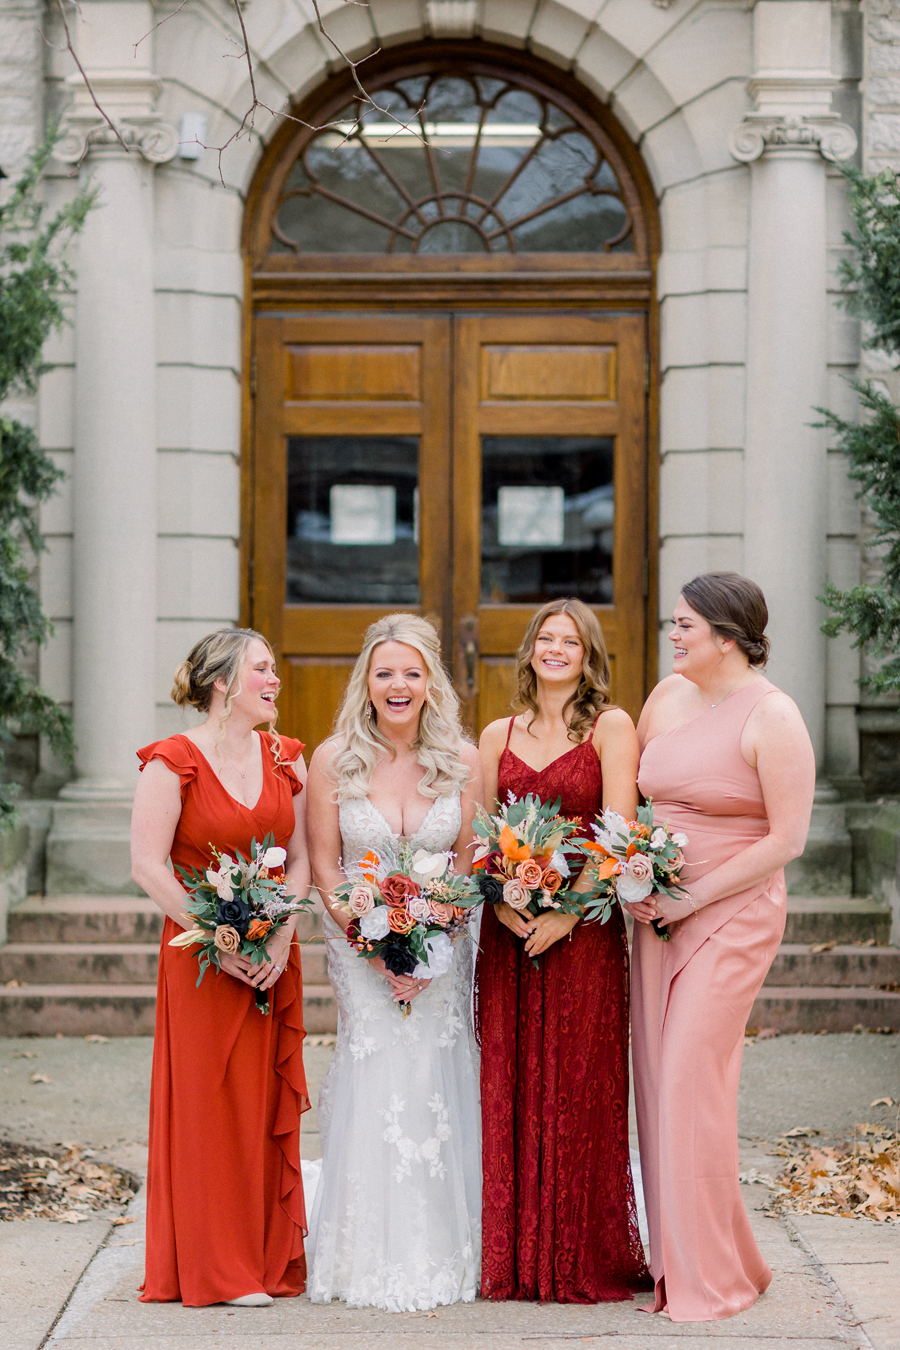 The bride and bridesmaids laugh during portraits on Mizzou campus before their Atrium on Tenth wedding in Columbia, Missouri by Love Tree Studios.